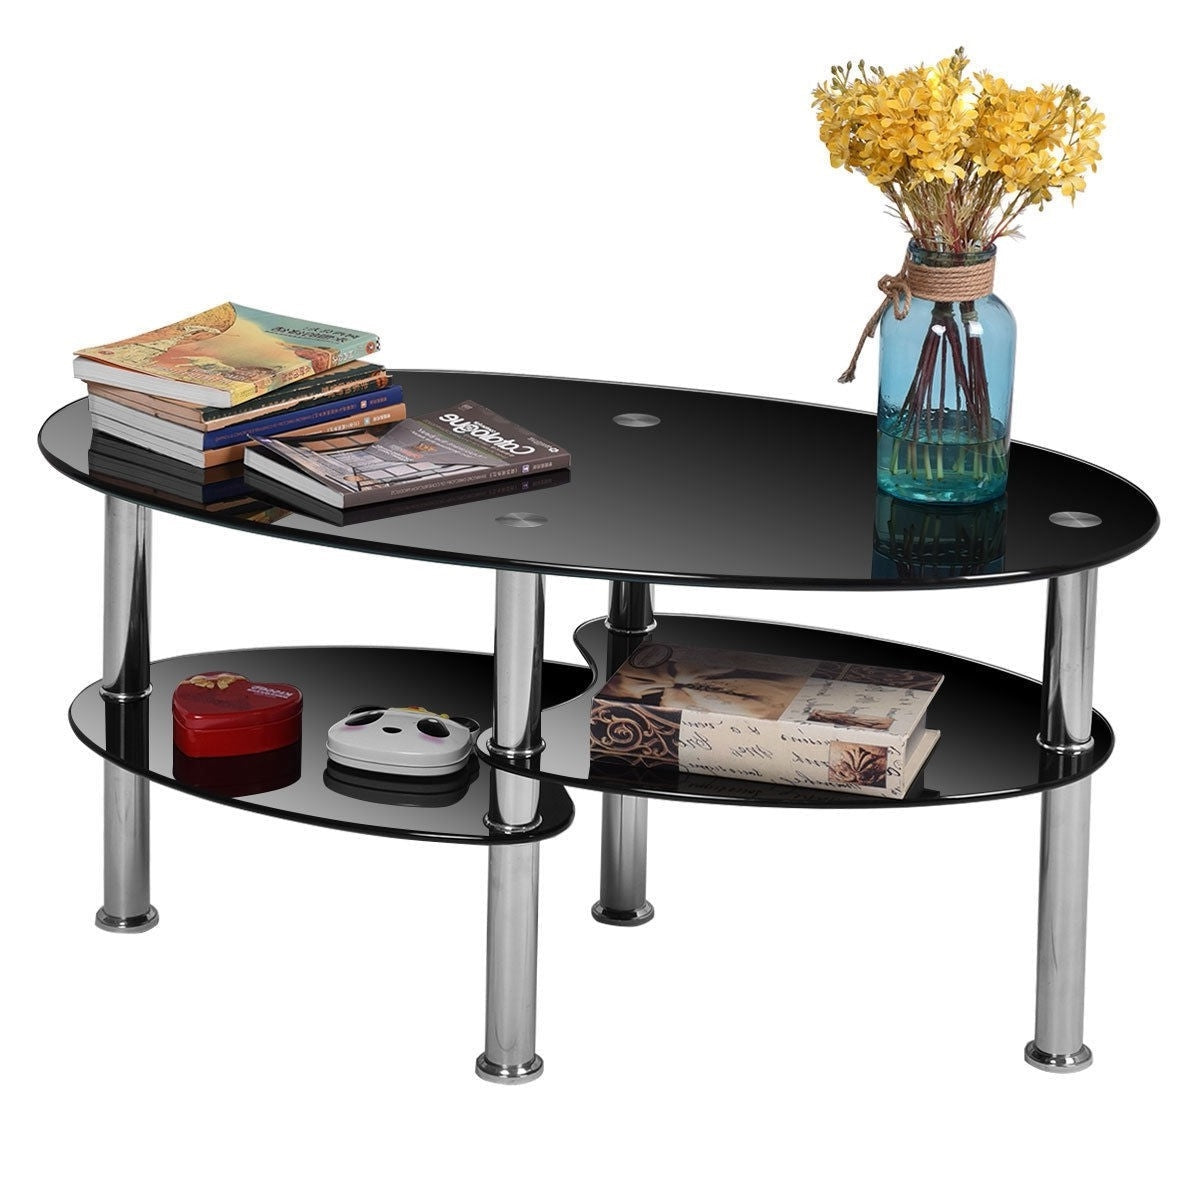 Living Room > Coffee Tables - Modern Black Tempered Glass Coffee Table With Bottom Shelf